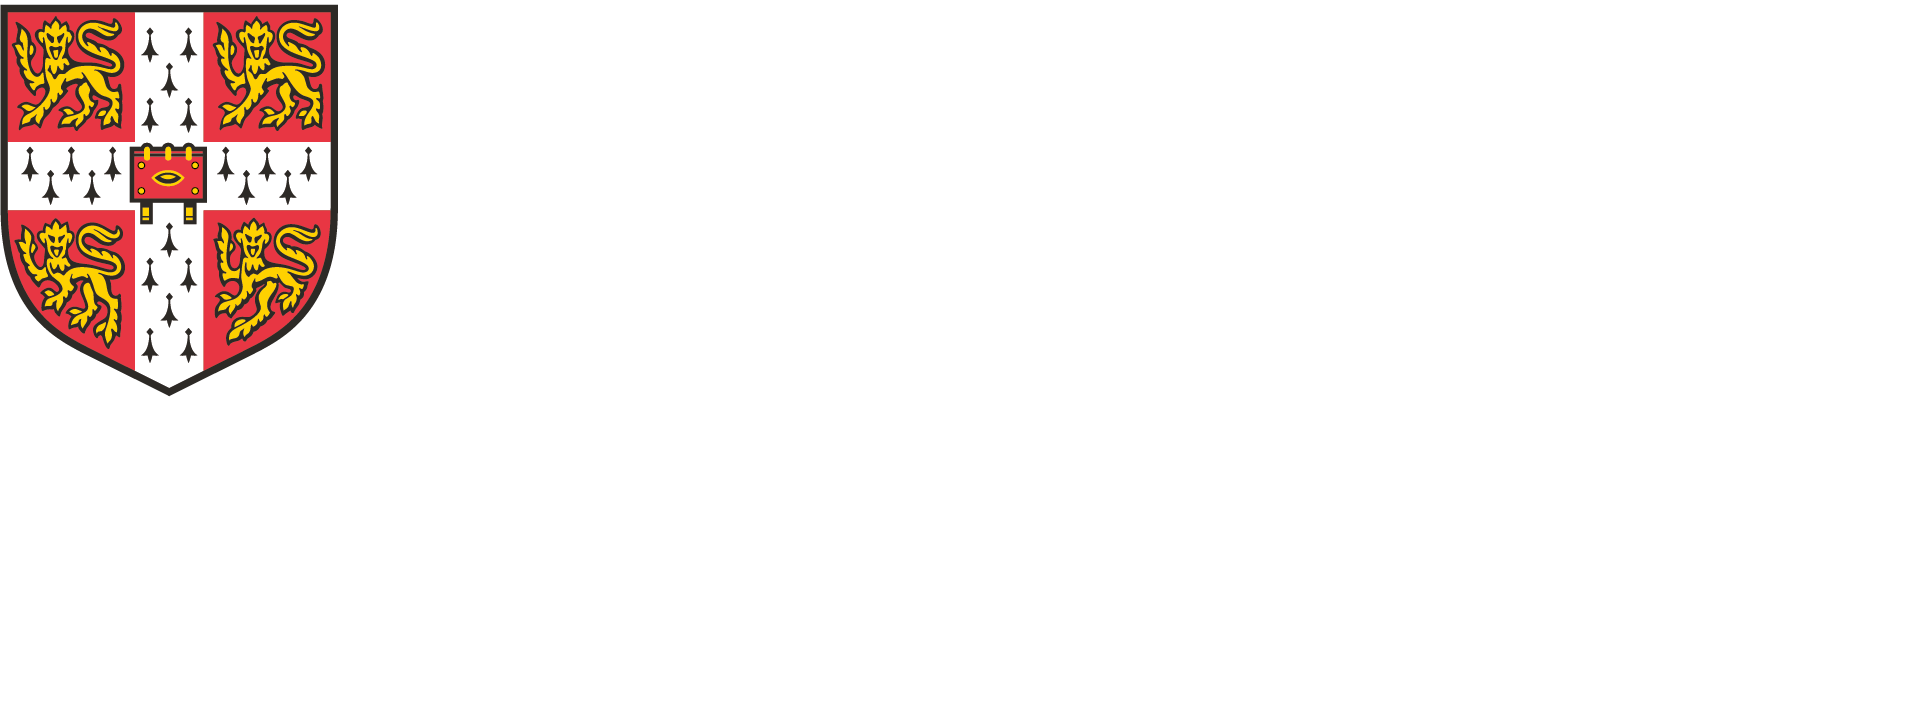 Centre for Resilience and Sustainable Development